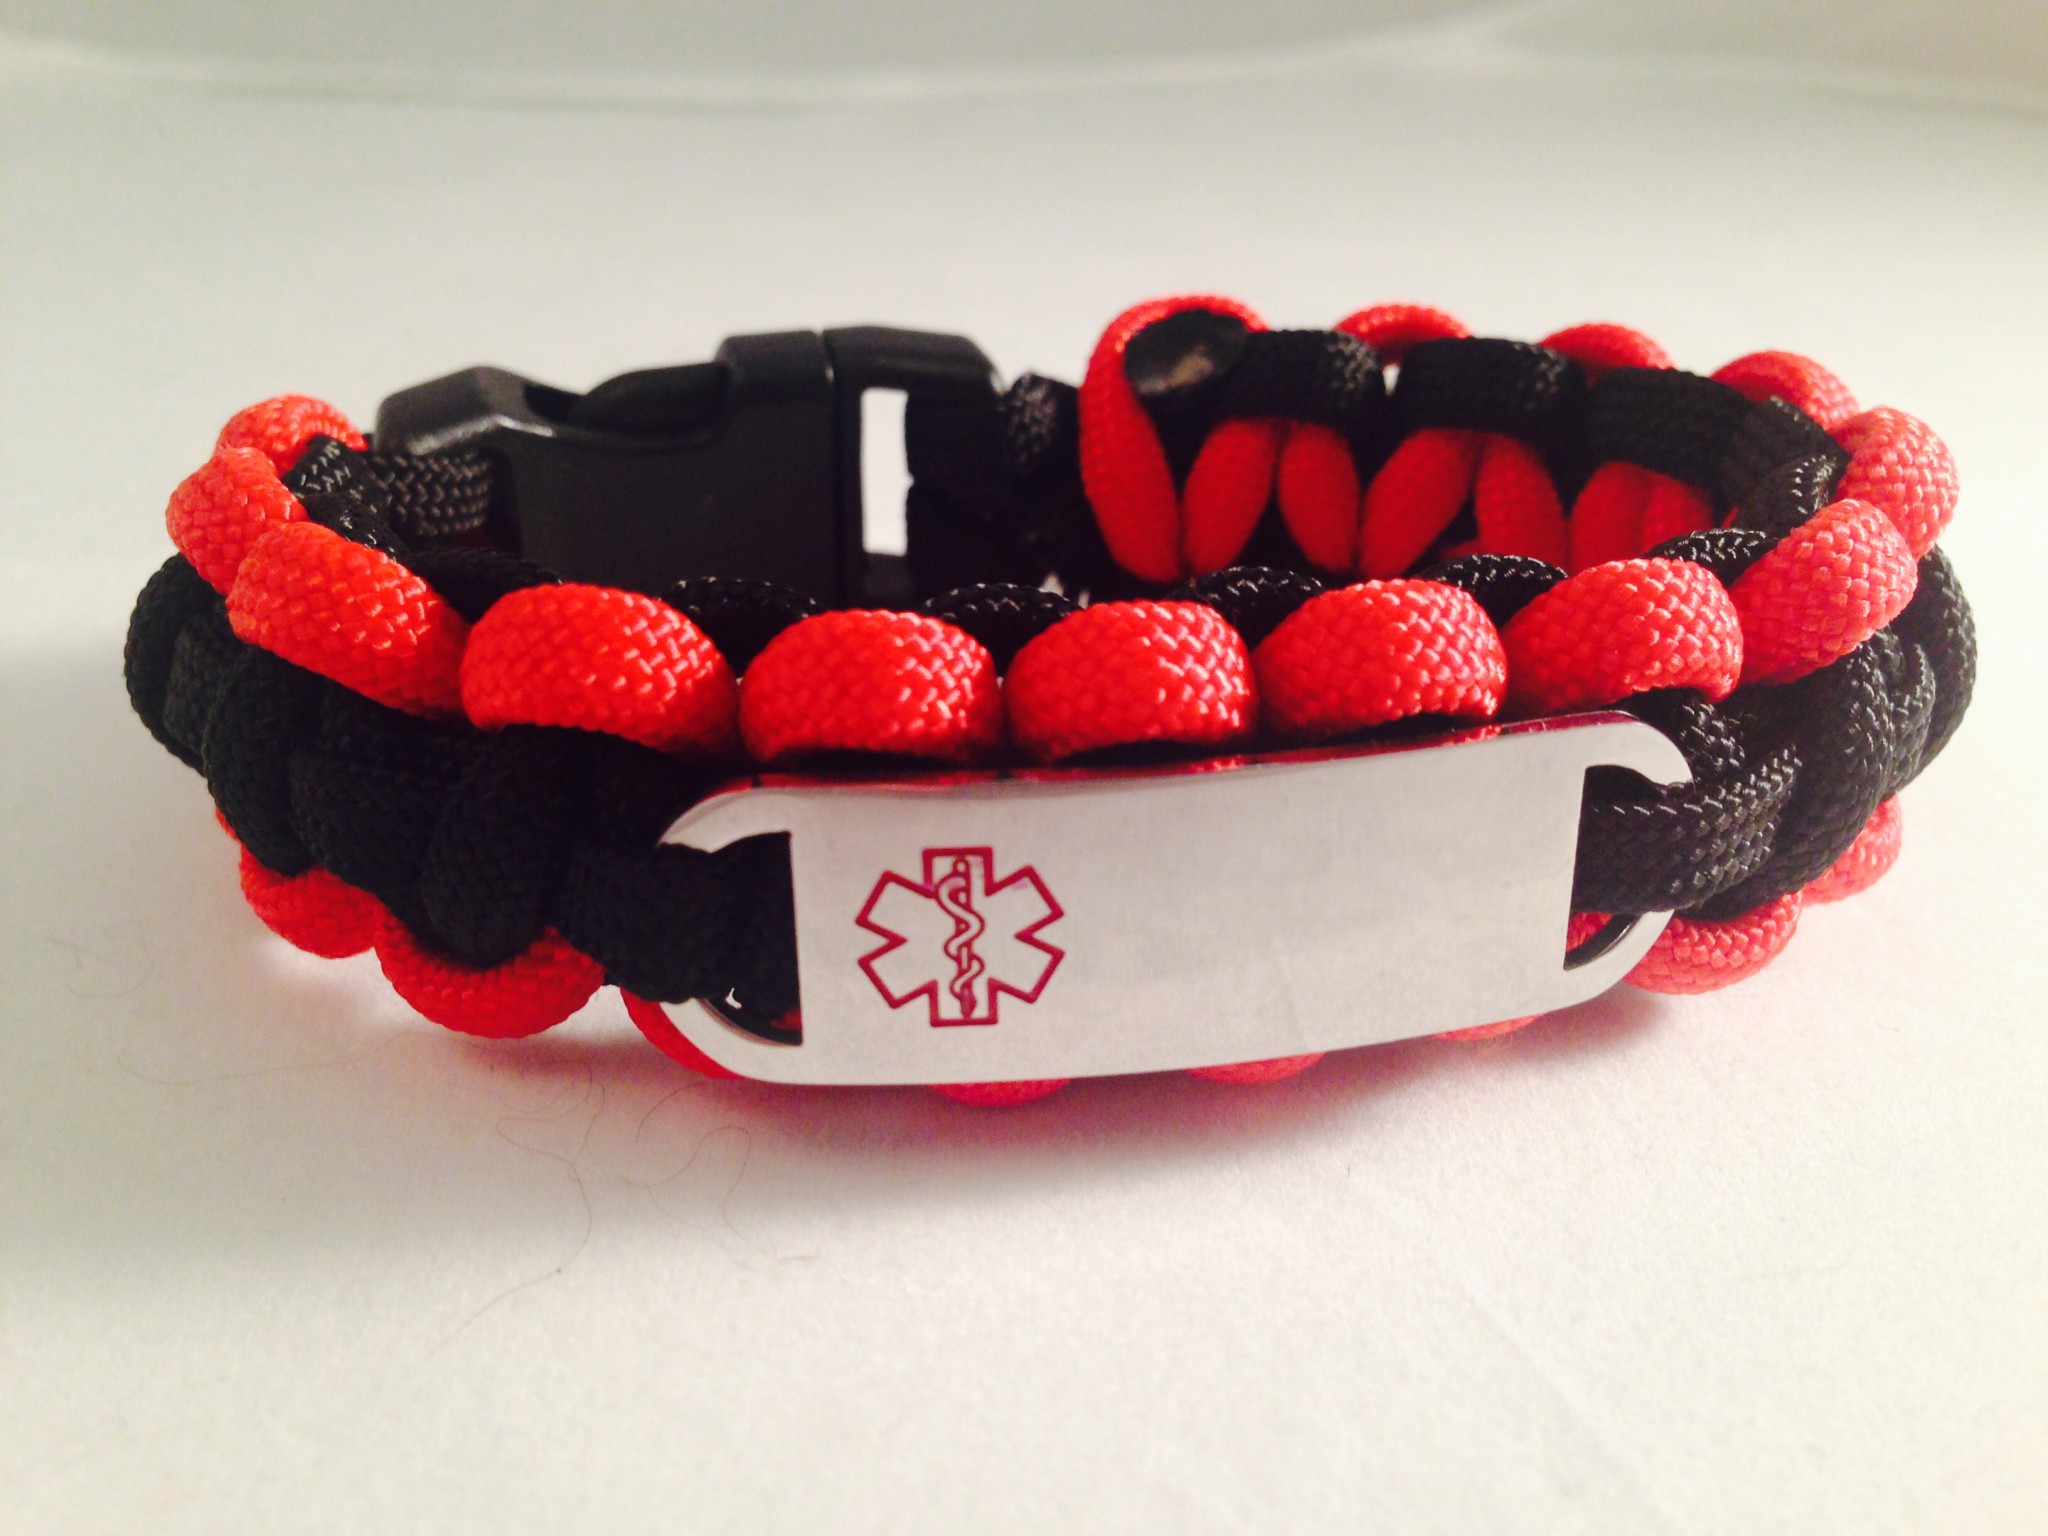 Medical alert bracelet personalized Made in the USA Sieraden Armbanden ID- & Medische armbanden Paracord bracelet in choice of color and text for kids or adults 